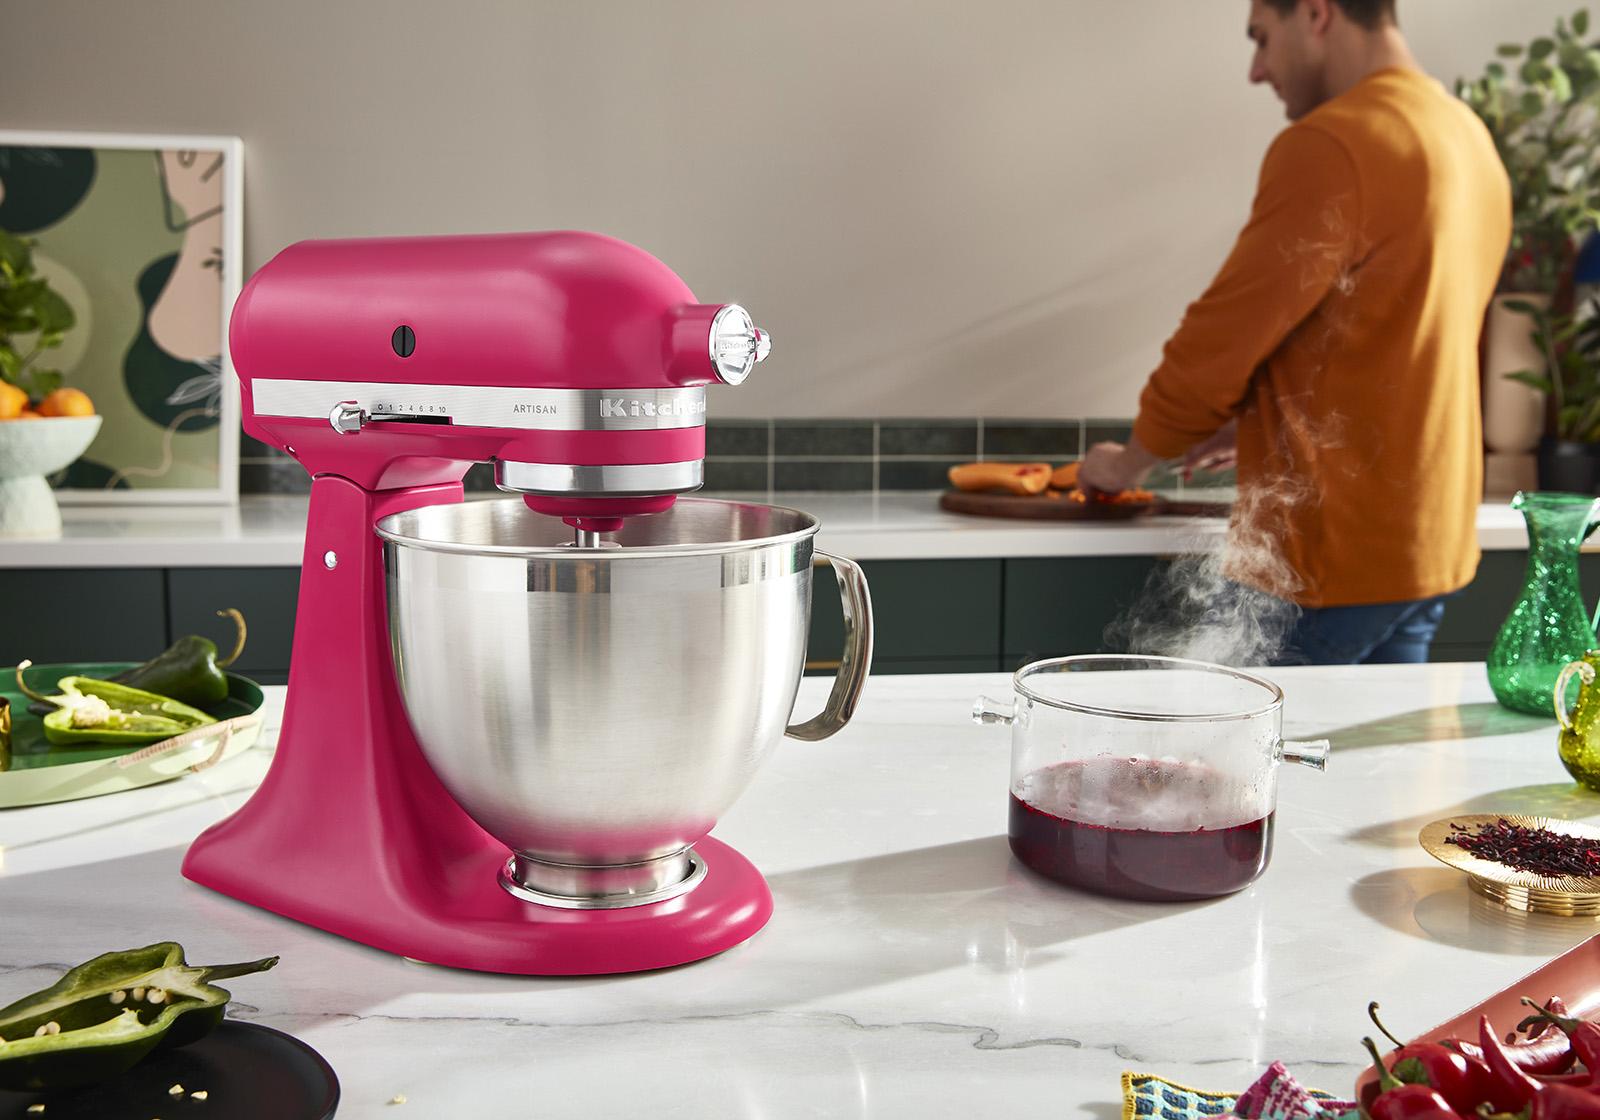 KitchenAid names Hibiscus as of - the 2023 Guides Restaurant Calendar year its Color